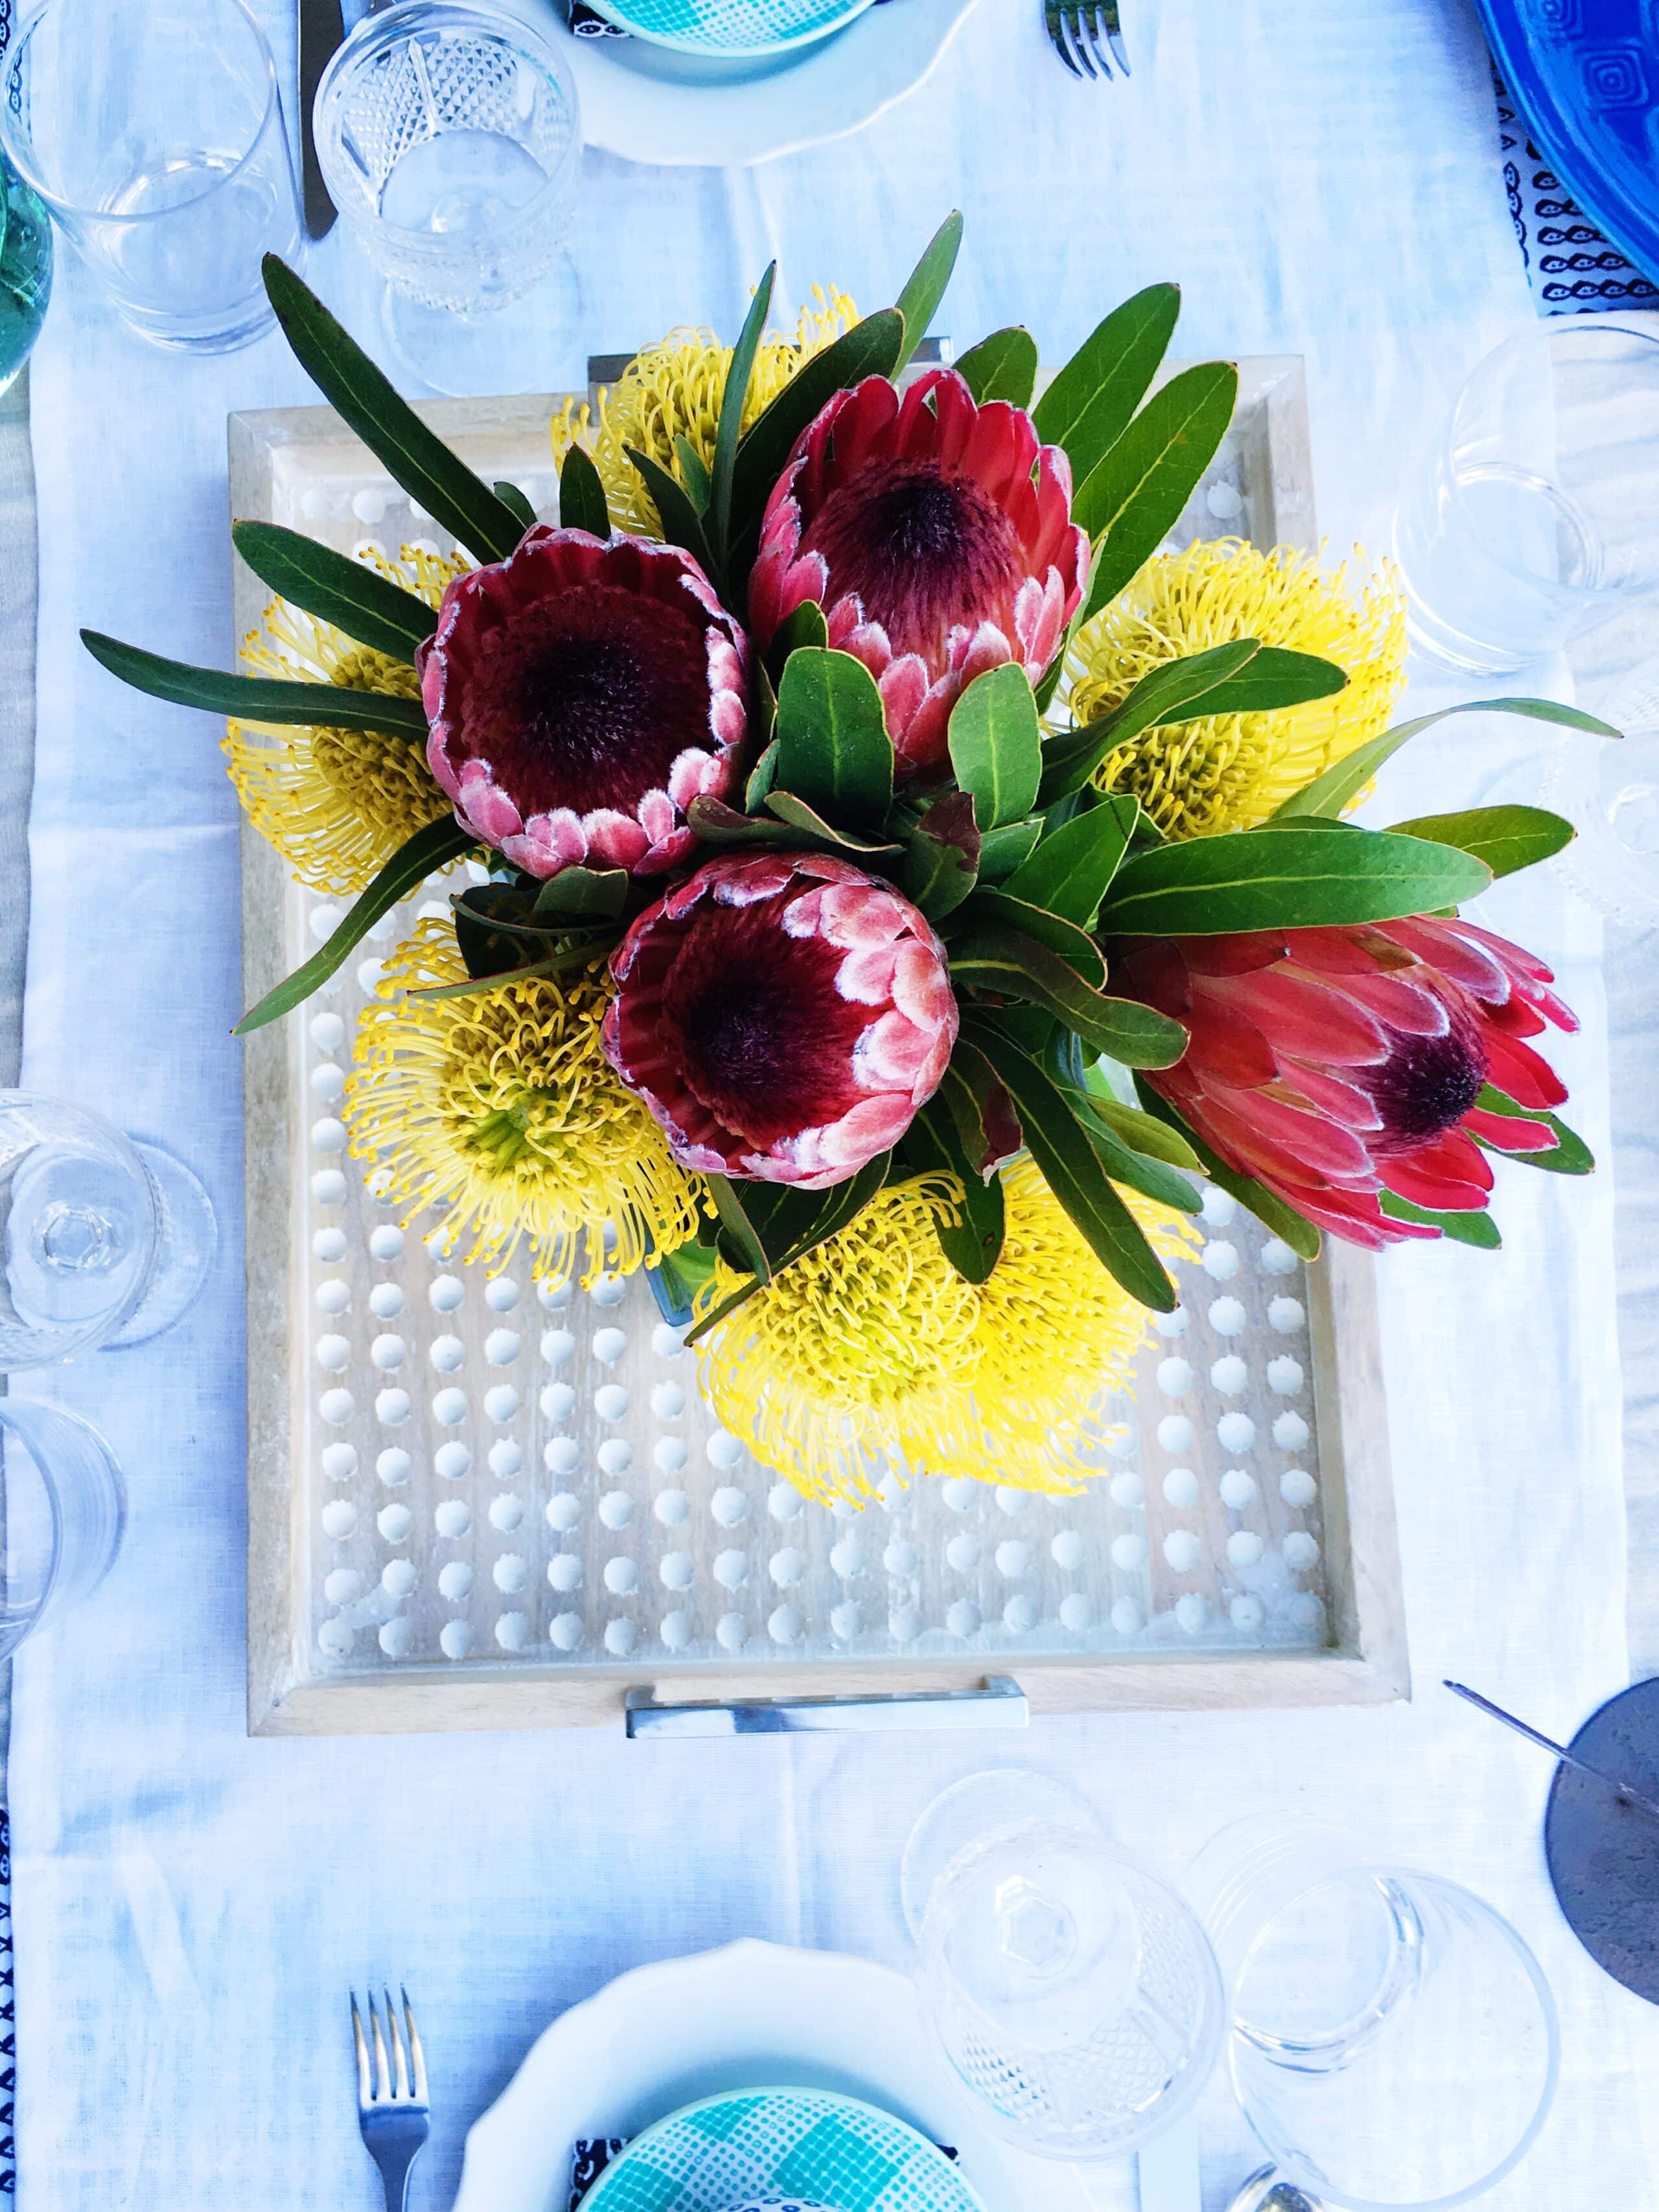 Homemade centerpiece was made from Proteas and yellow Pincushion flowers.